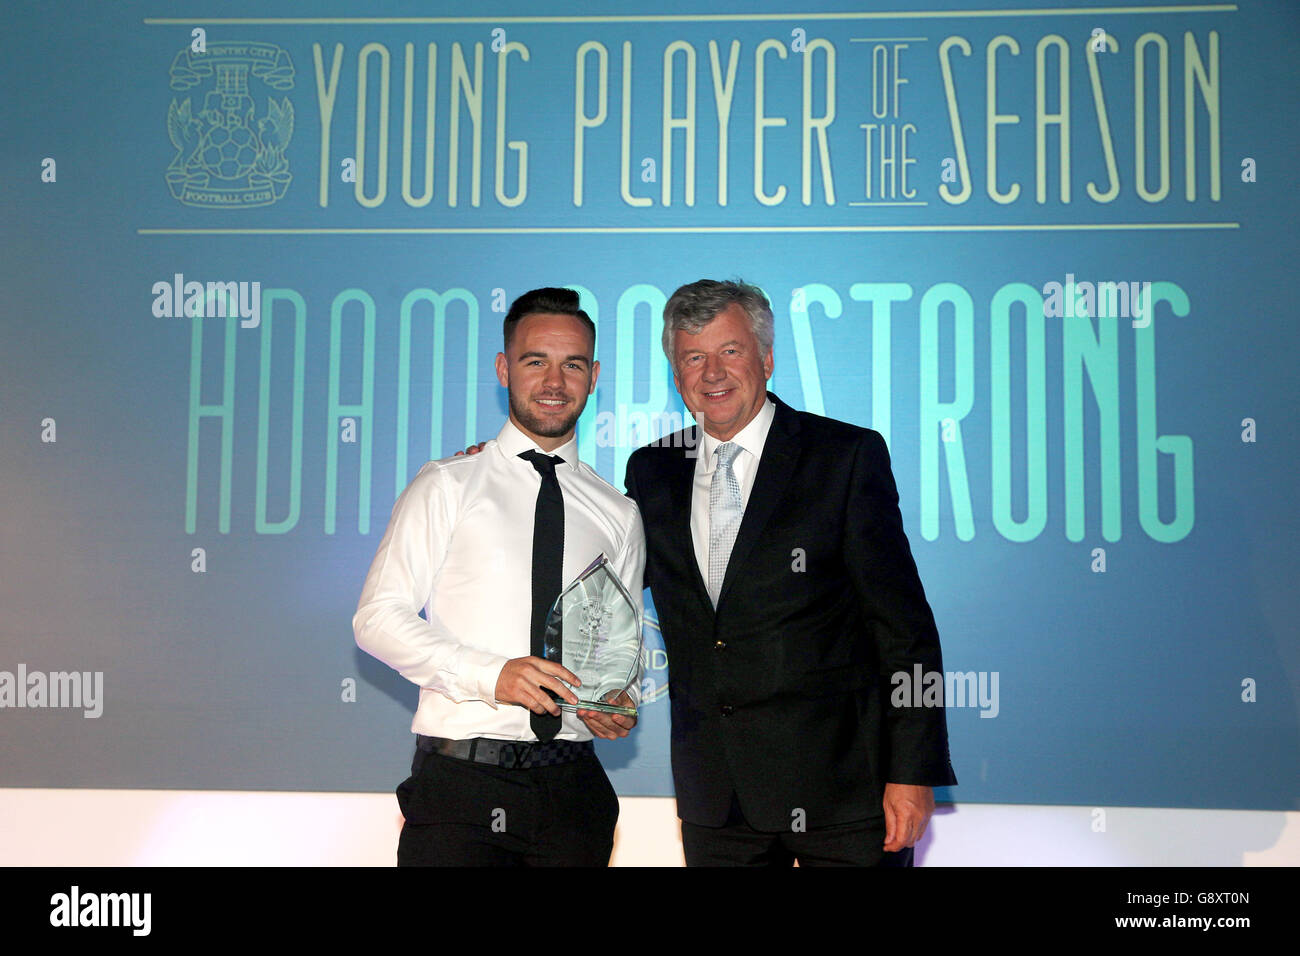 Coventry City End of Season Awards sera. Adam Armstrong di Coventry City riceve il premio Young Player of the Season Foto Stock